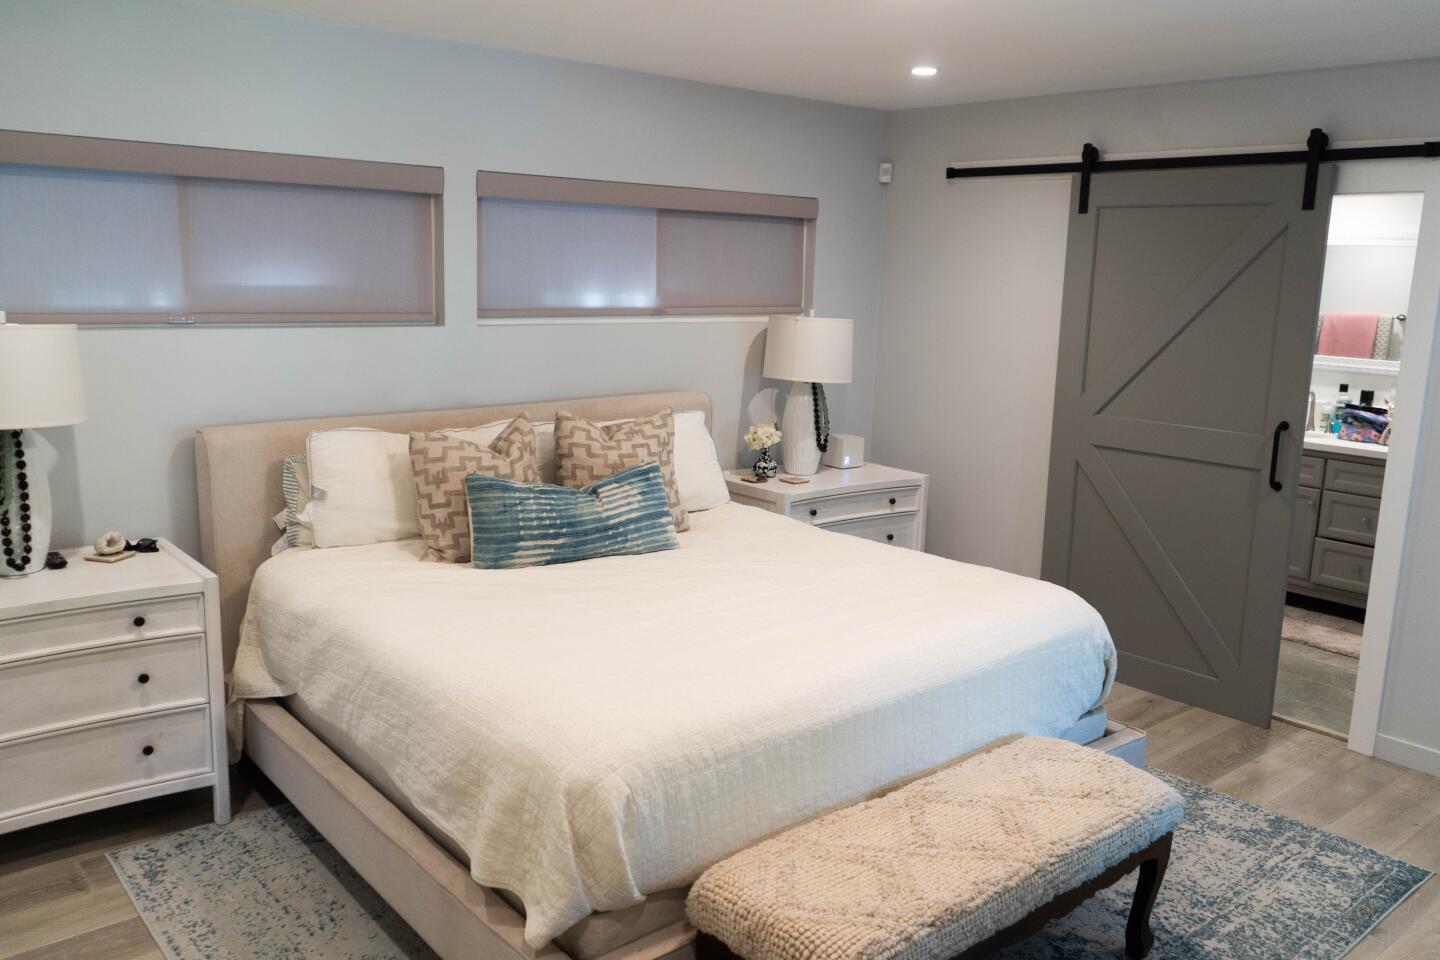 Actor and dancer Heather Morris' tranquil bedroom is the favorite room in her Woodland Hills home.